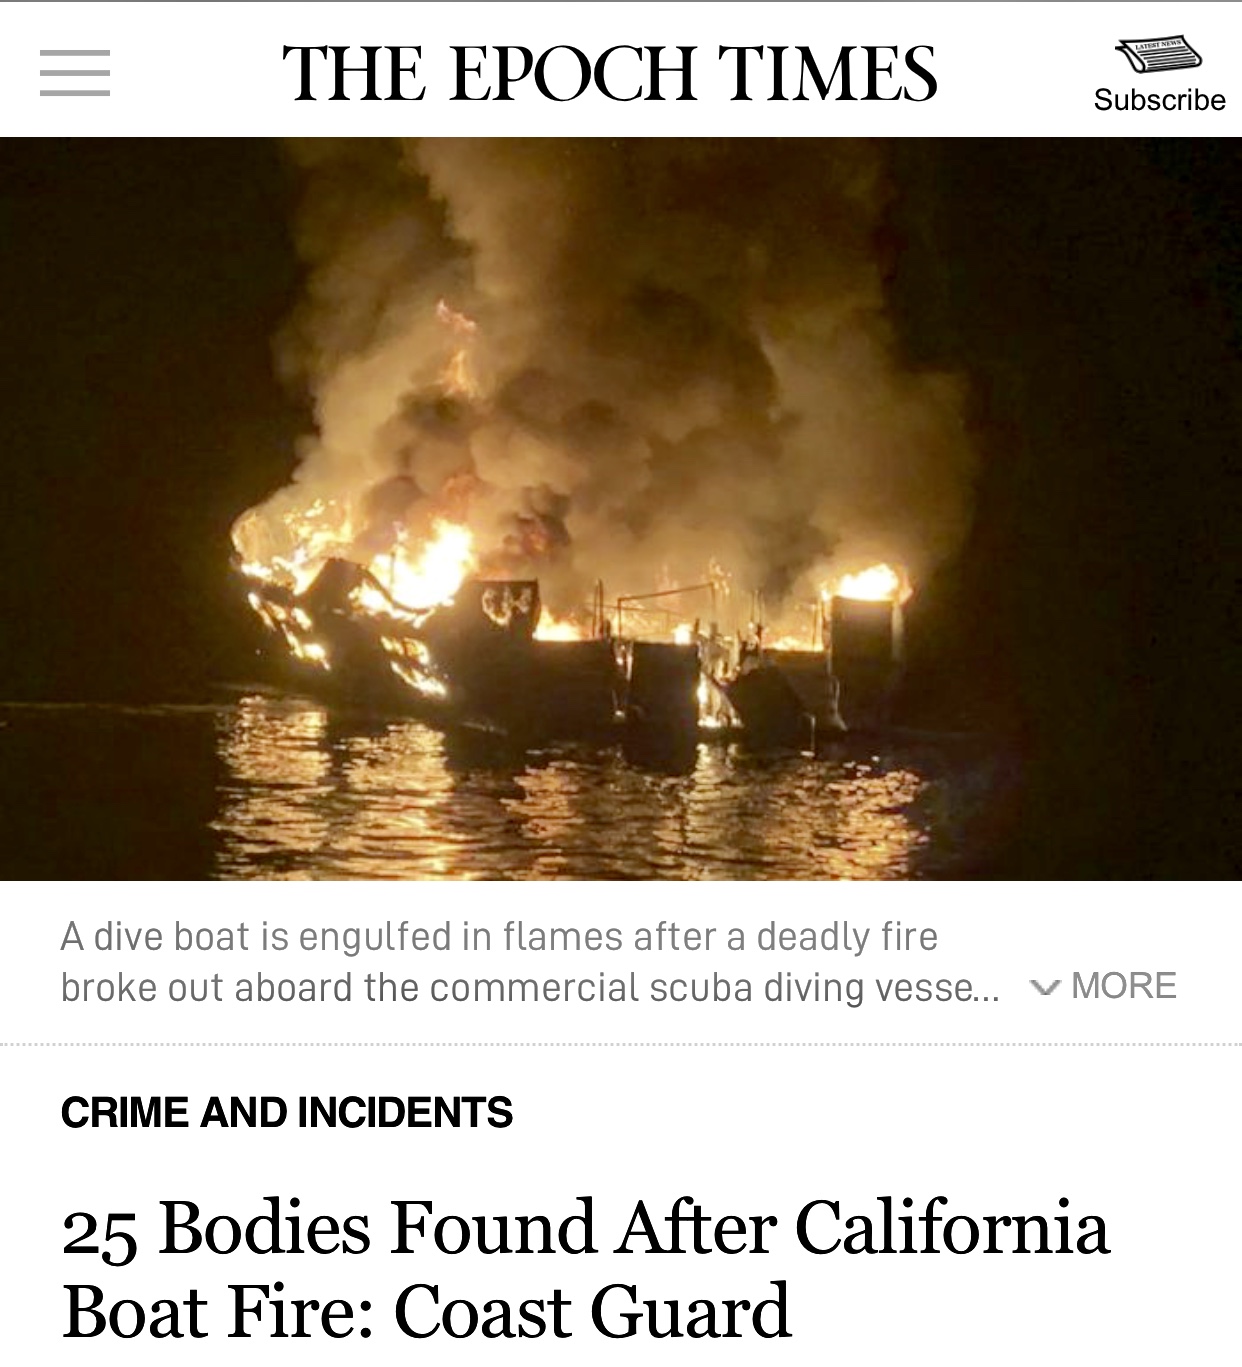 California boat fire: 25 Bodies Found After Boat Fire